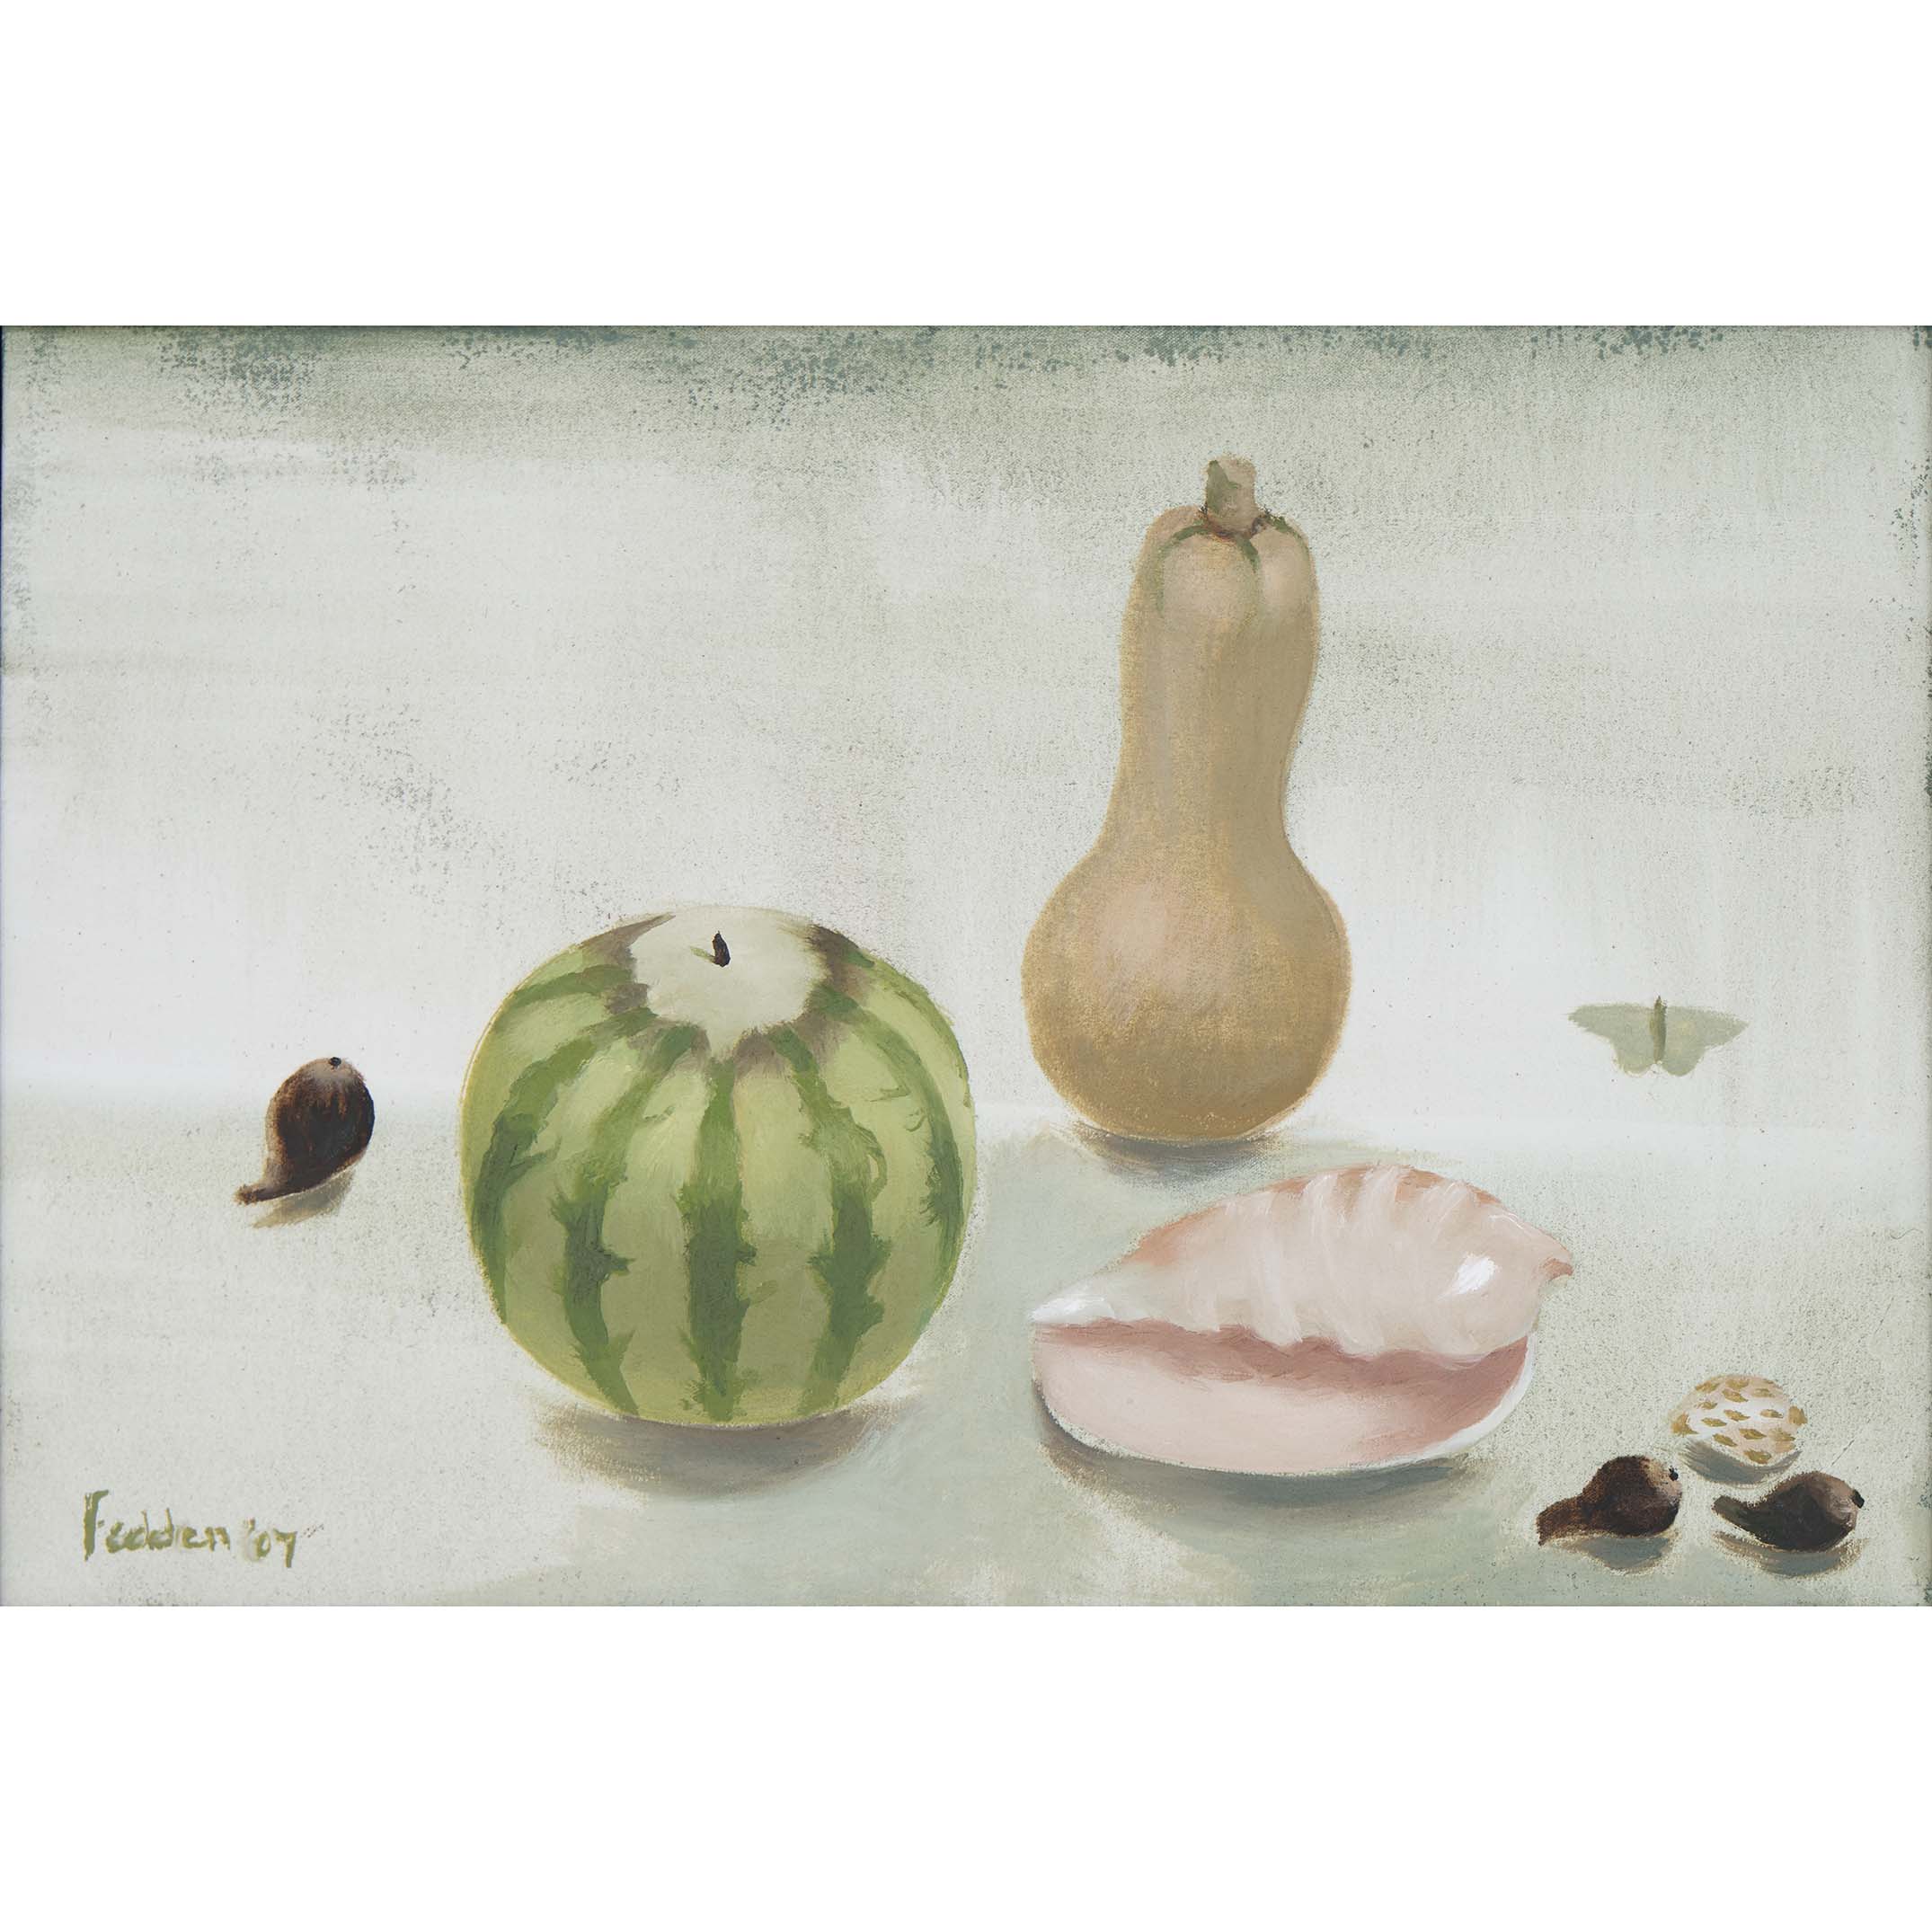 MARY FEDDEN. THE PINK SHELL. 2007. SOLD